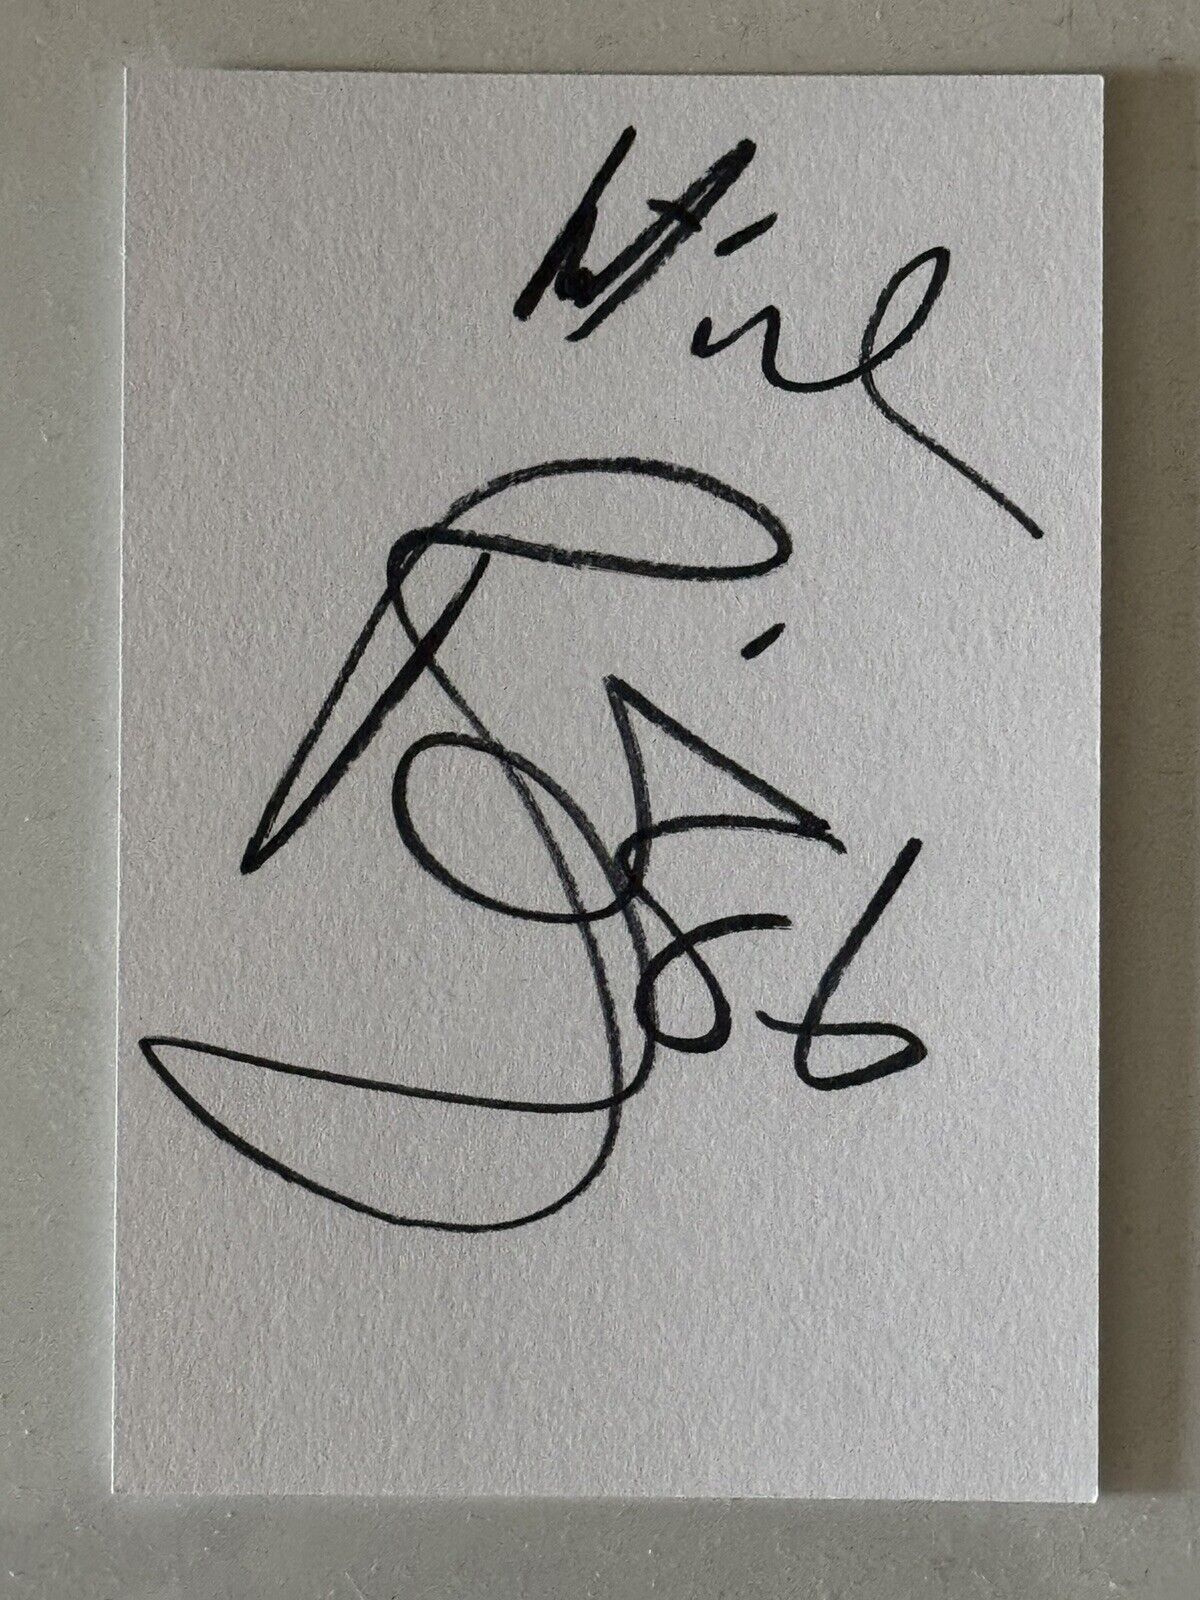 David Bowie signed card